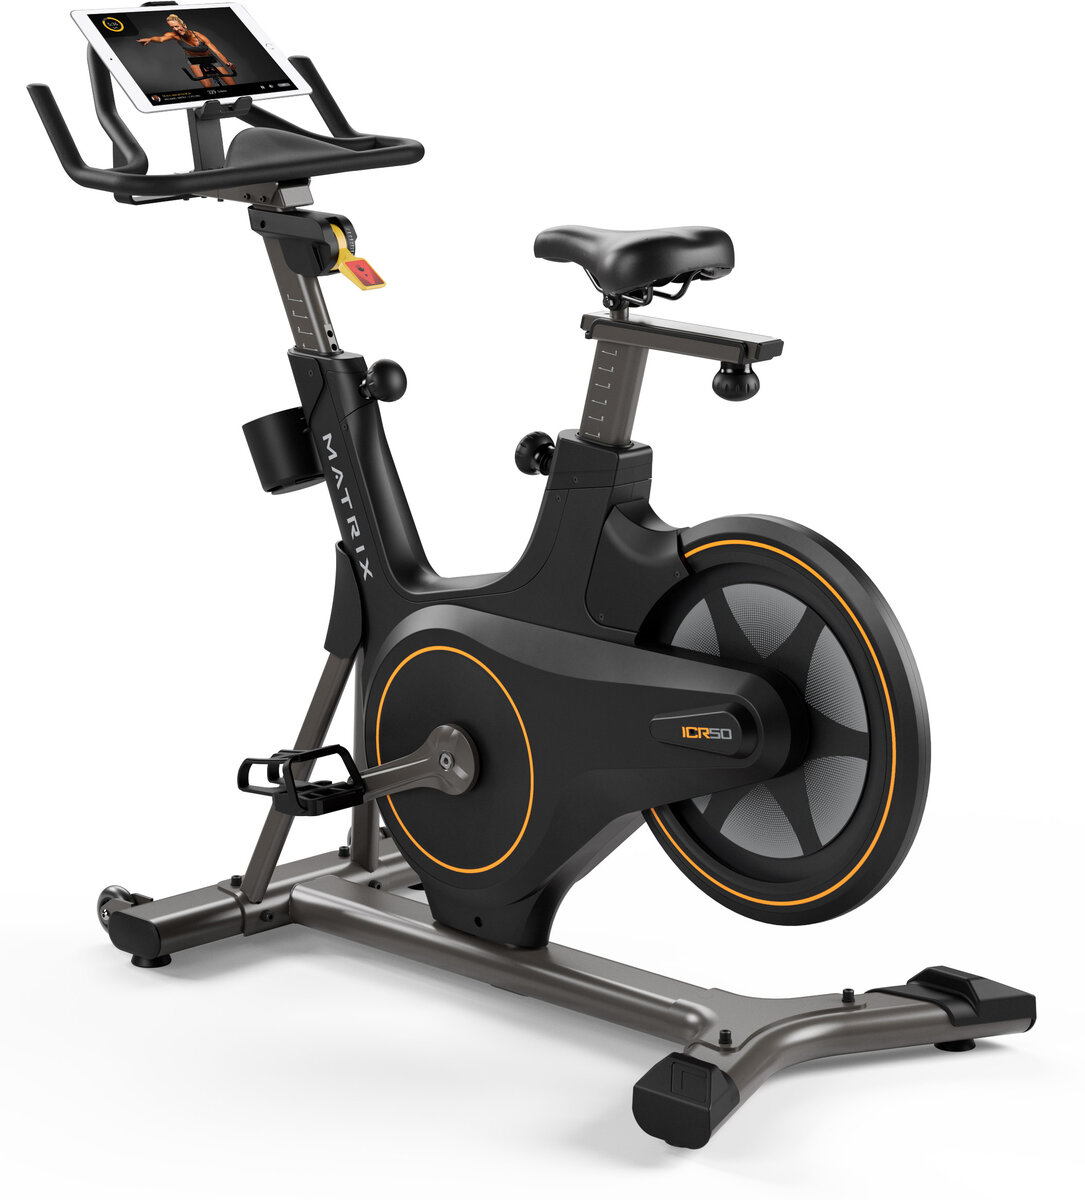 ICR50 Indoor Cycle | lupon.gov.ph